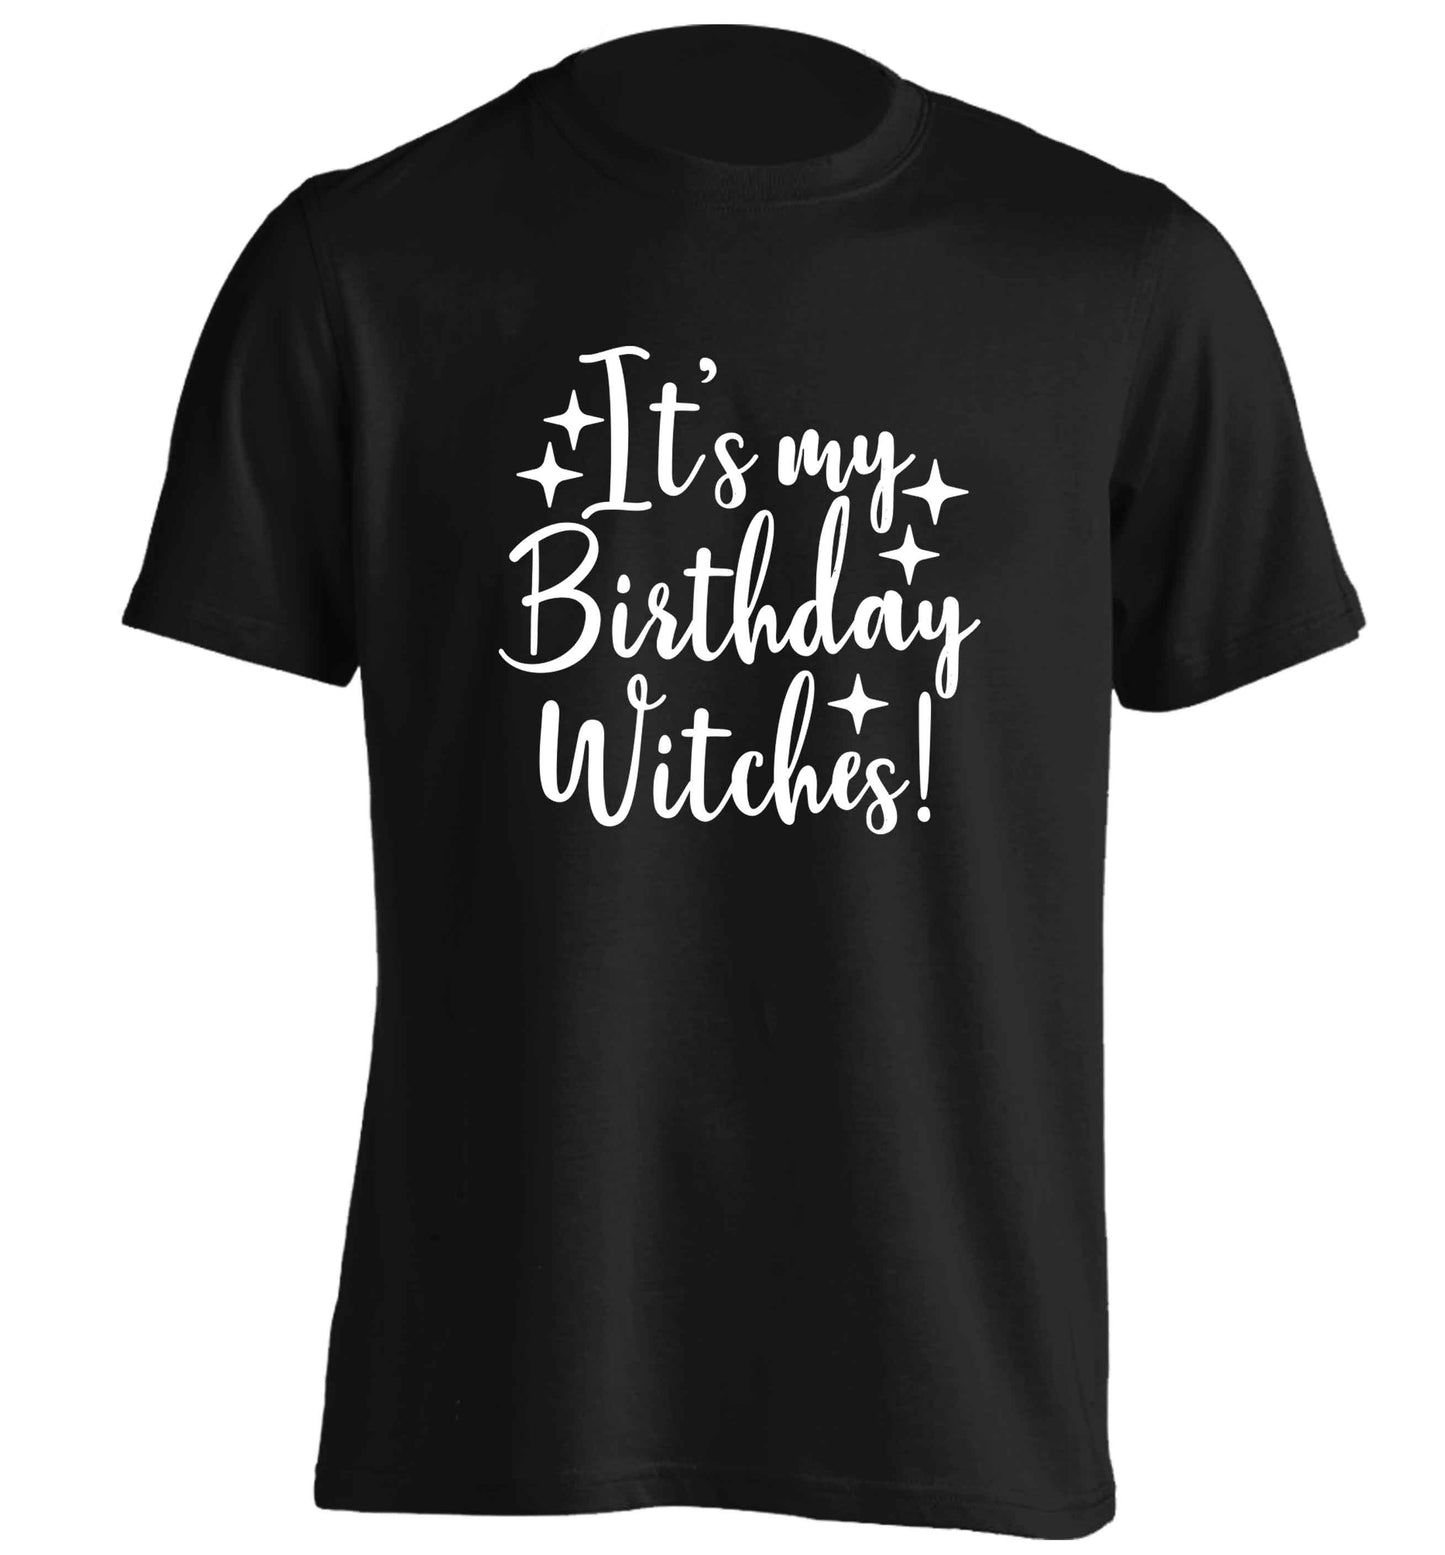 It's my birthday witches!adults unisex black Tshirt 2XL